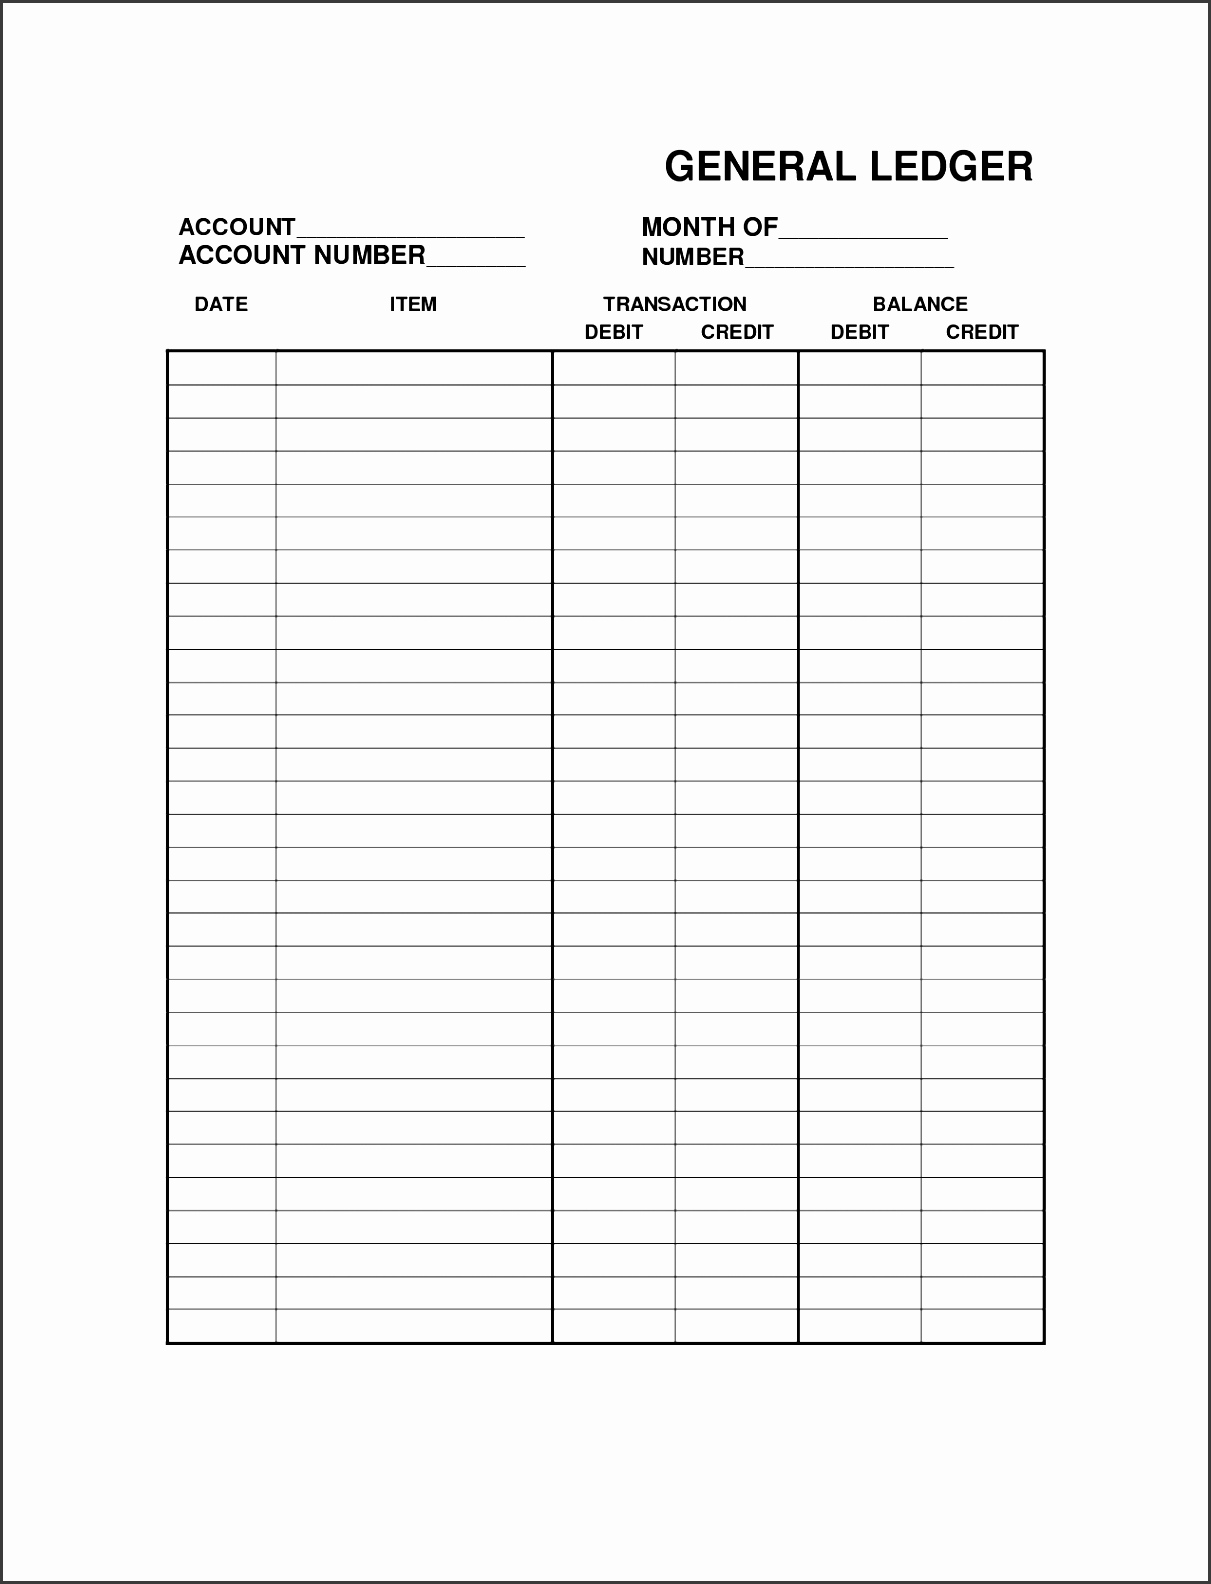 free printable bookkeeping sheets general ledger free office form template small businesses pinterest general ledger free printable and template